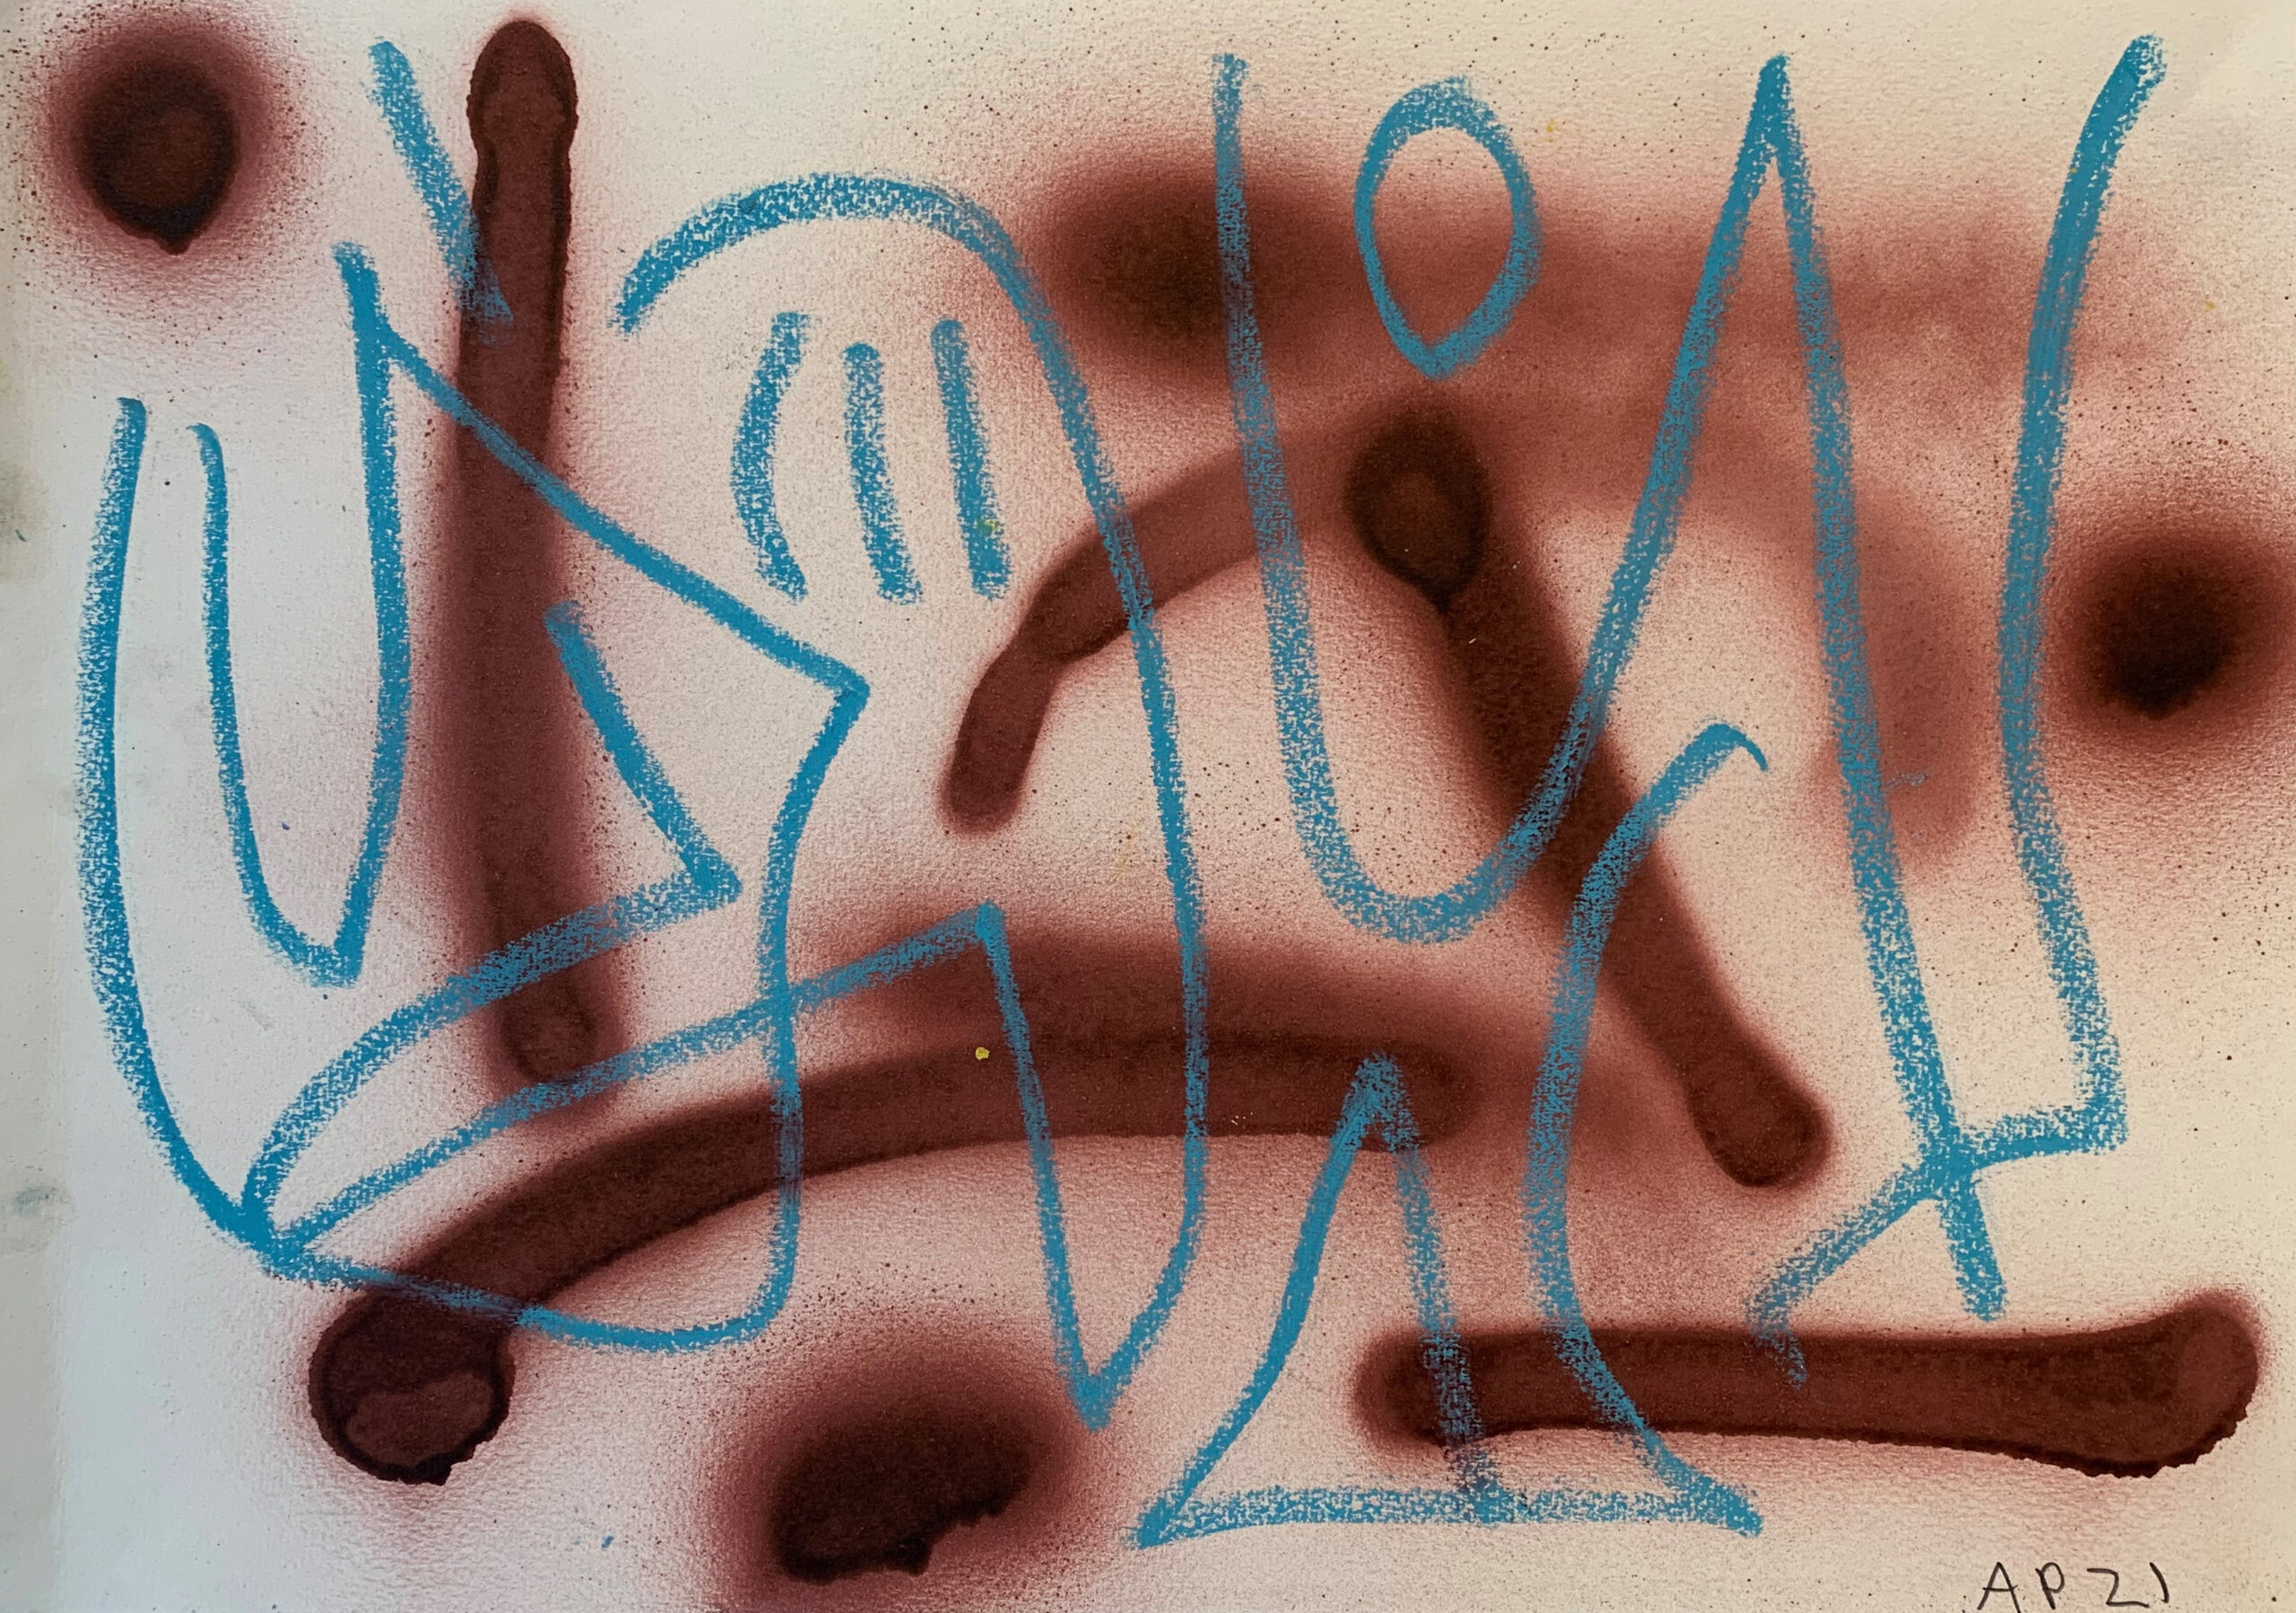 Poulet_Untitled 8 (Walk) _pastel and spray paint on paper_30 x 42cm